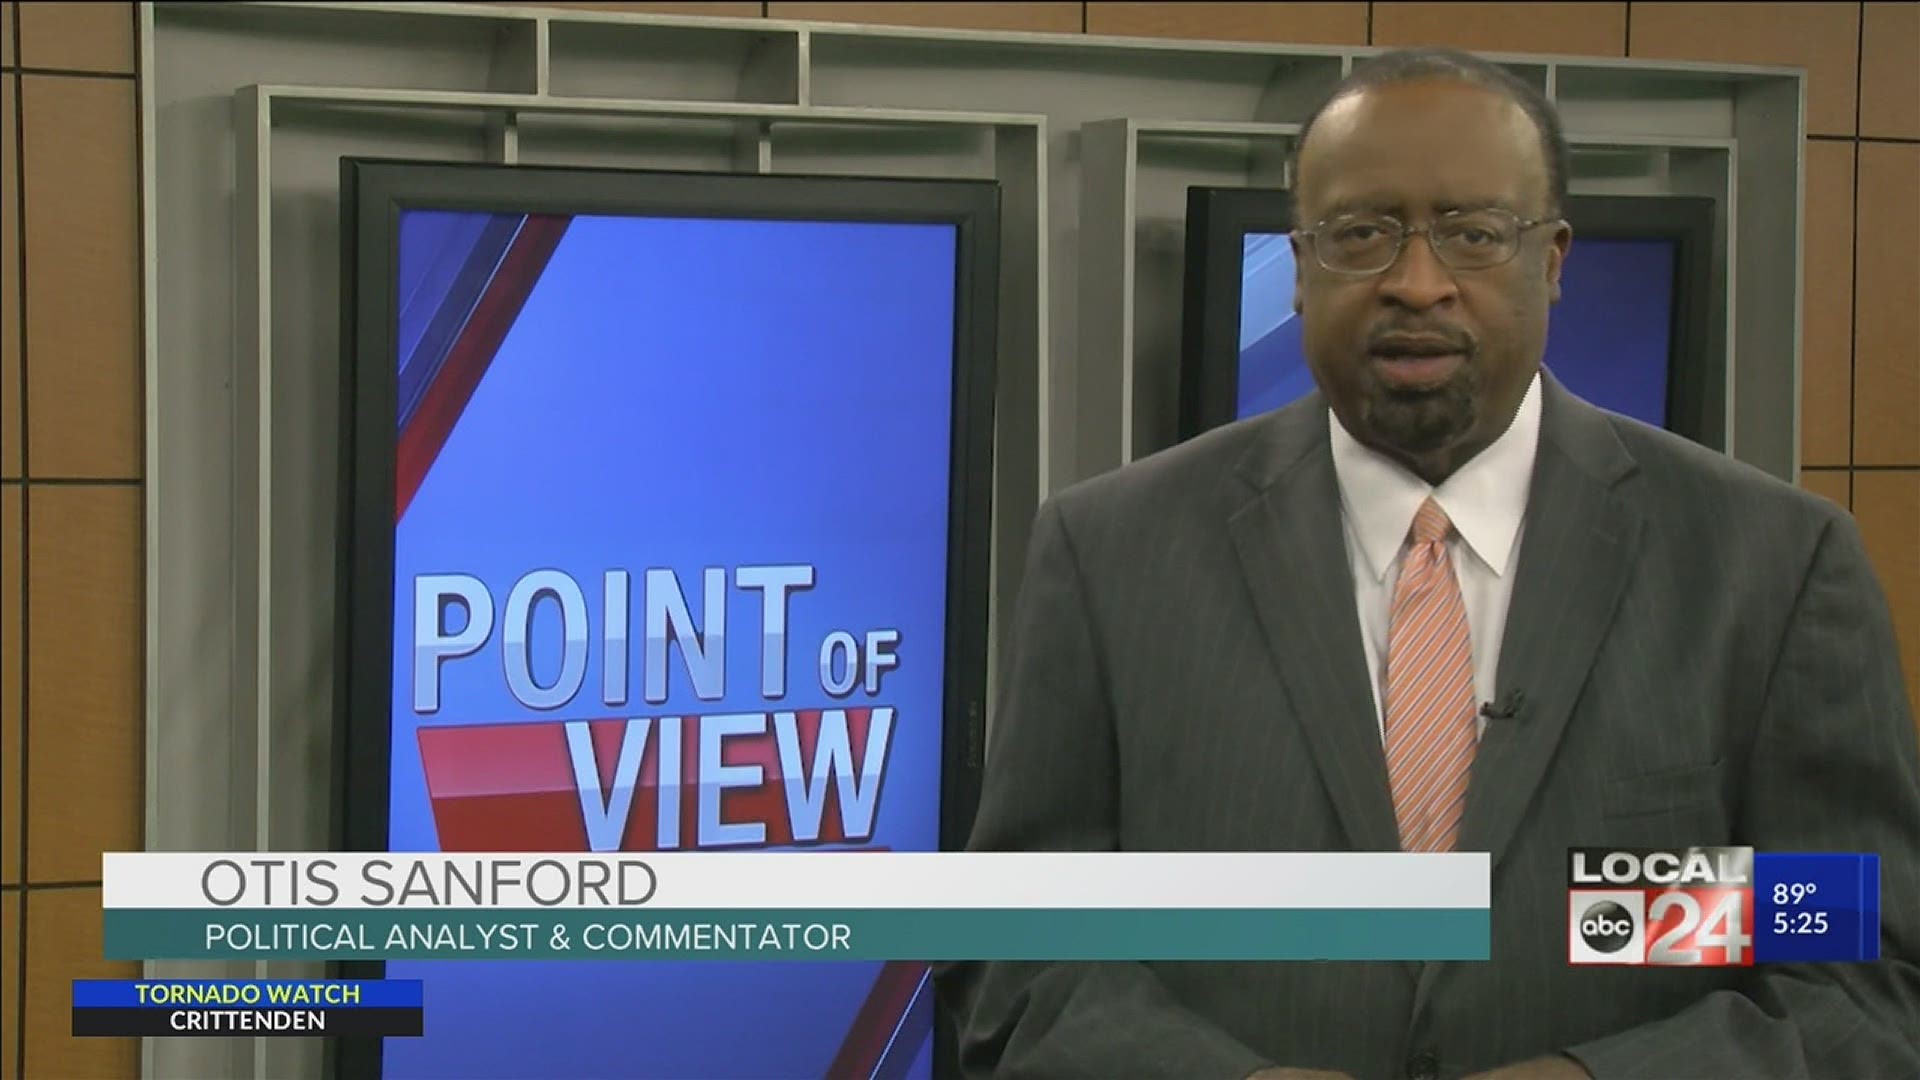 Local 24 News political analyst and commentator Otis Sanford shares his point of view on virtual learning in Shelby County.